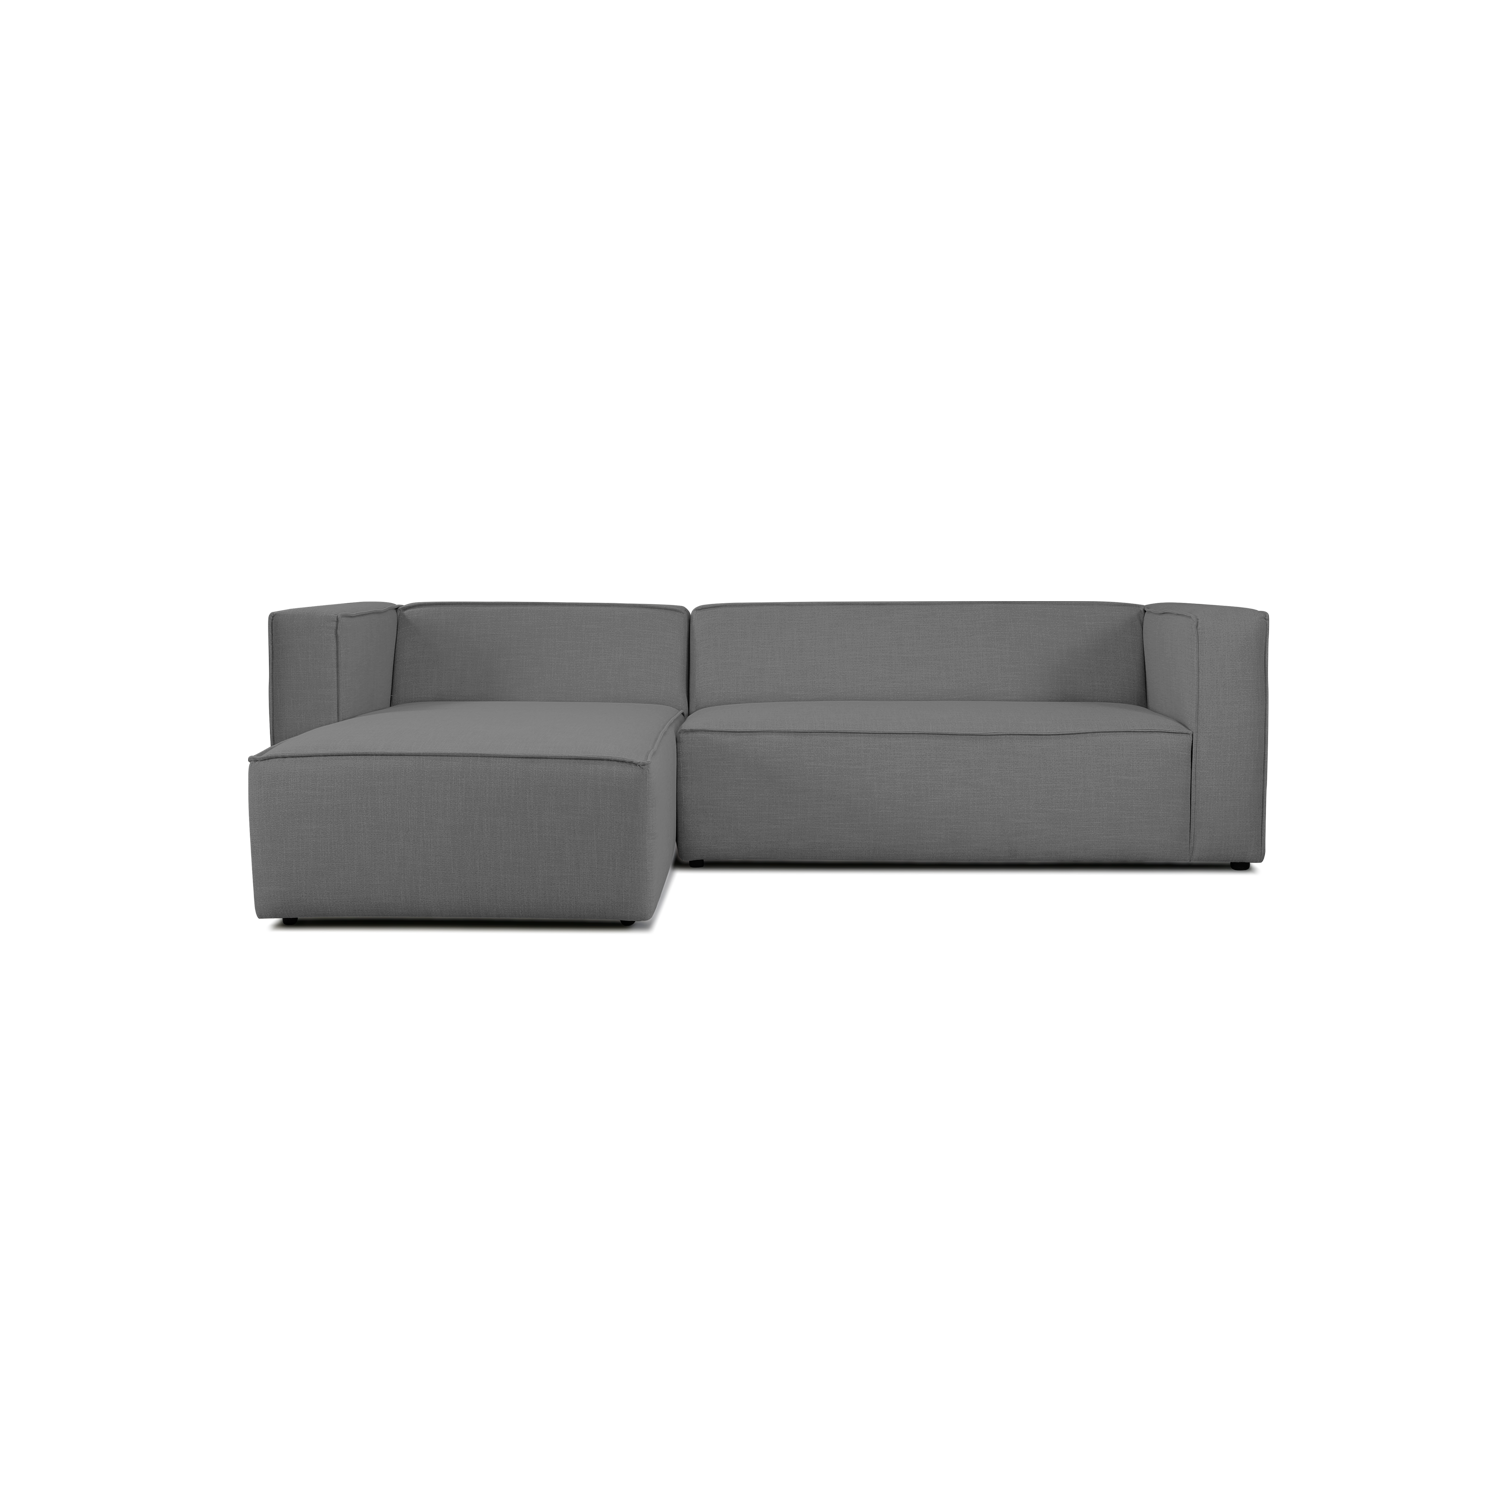 Medium: 2 Seater + Daybed [Left]